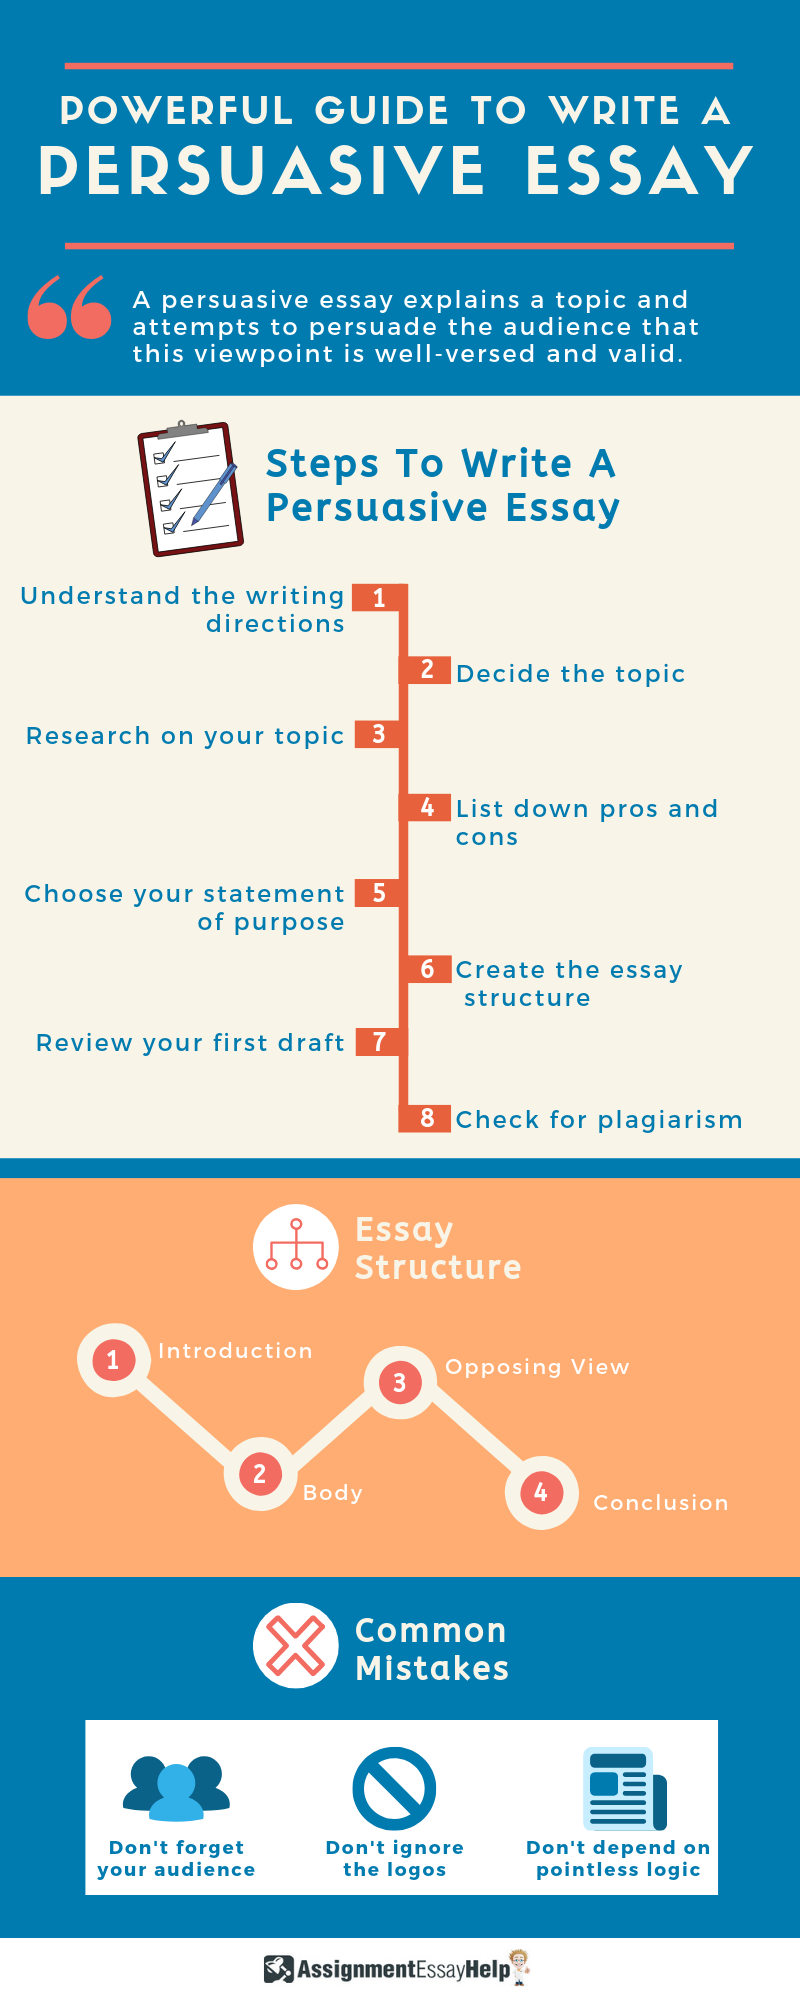 Persuasive Essay - Writing Guide, Outline and Topics